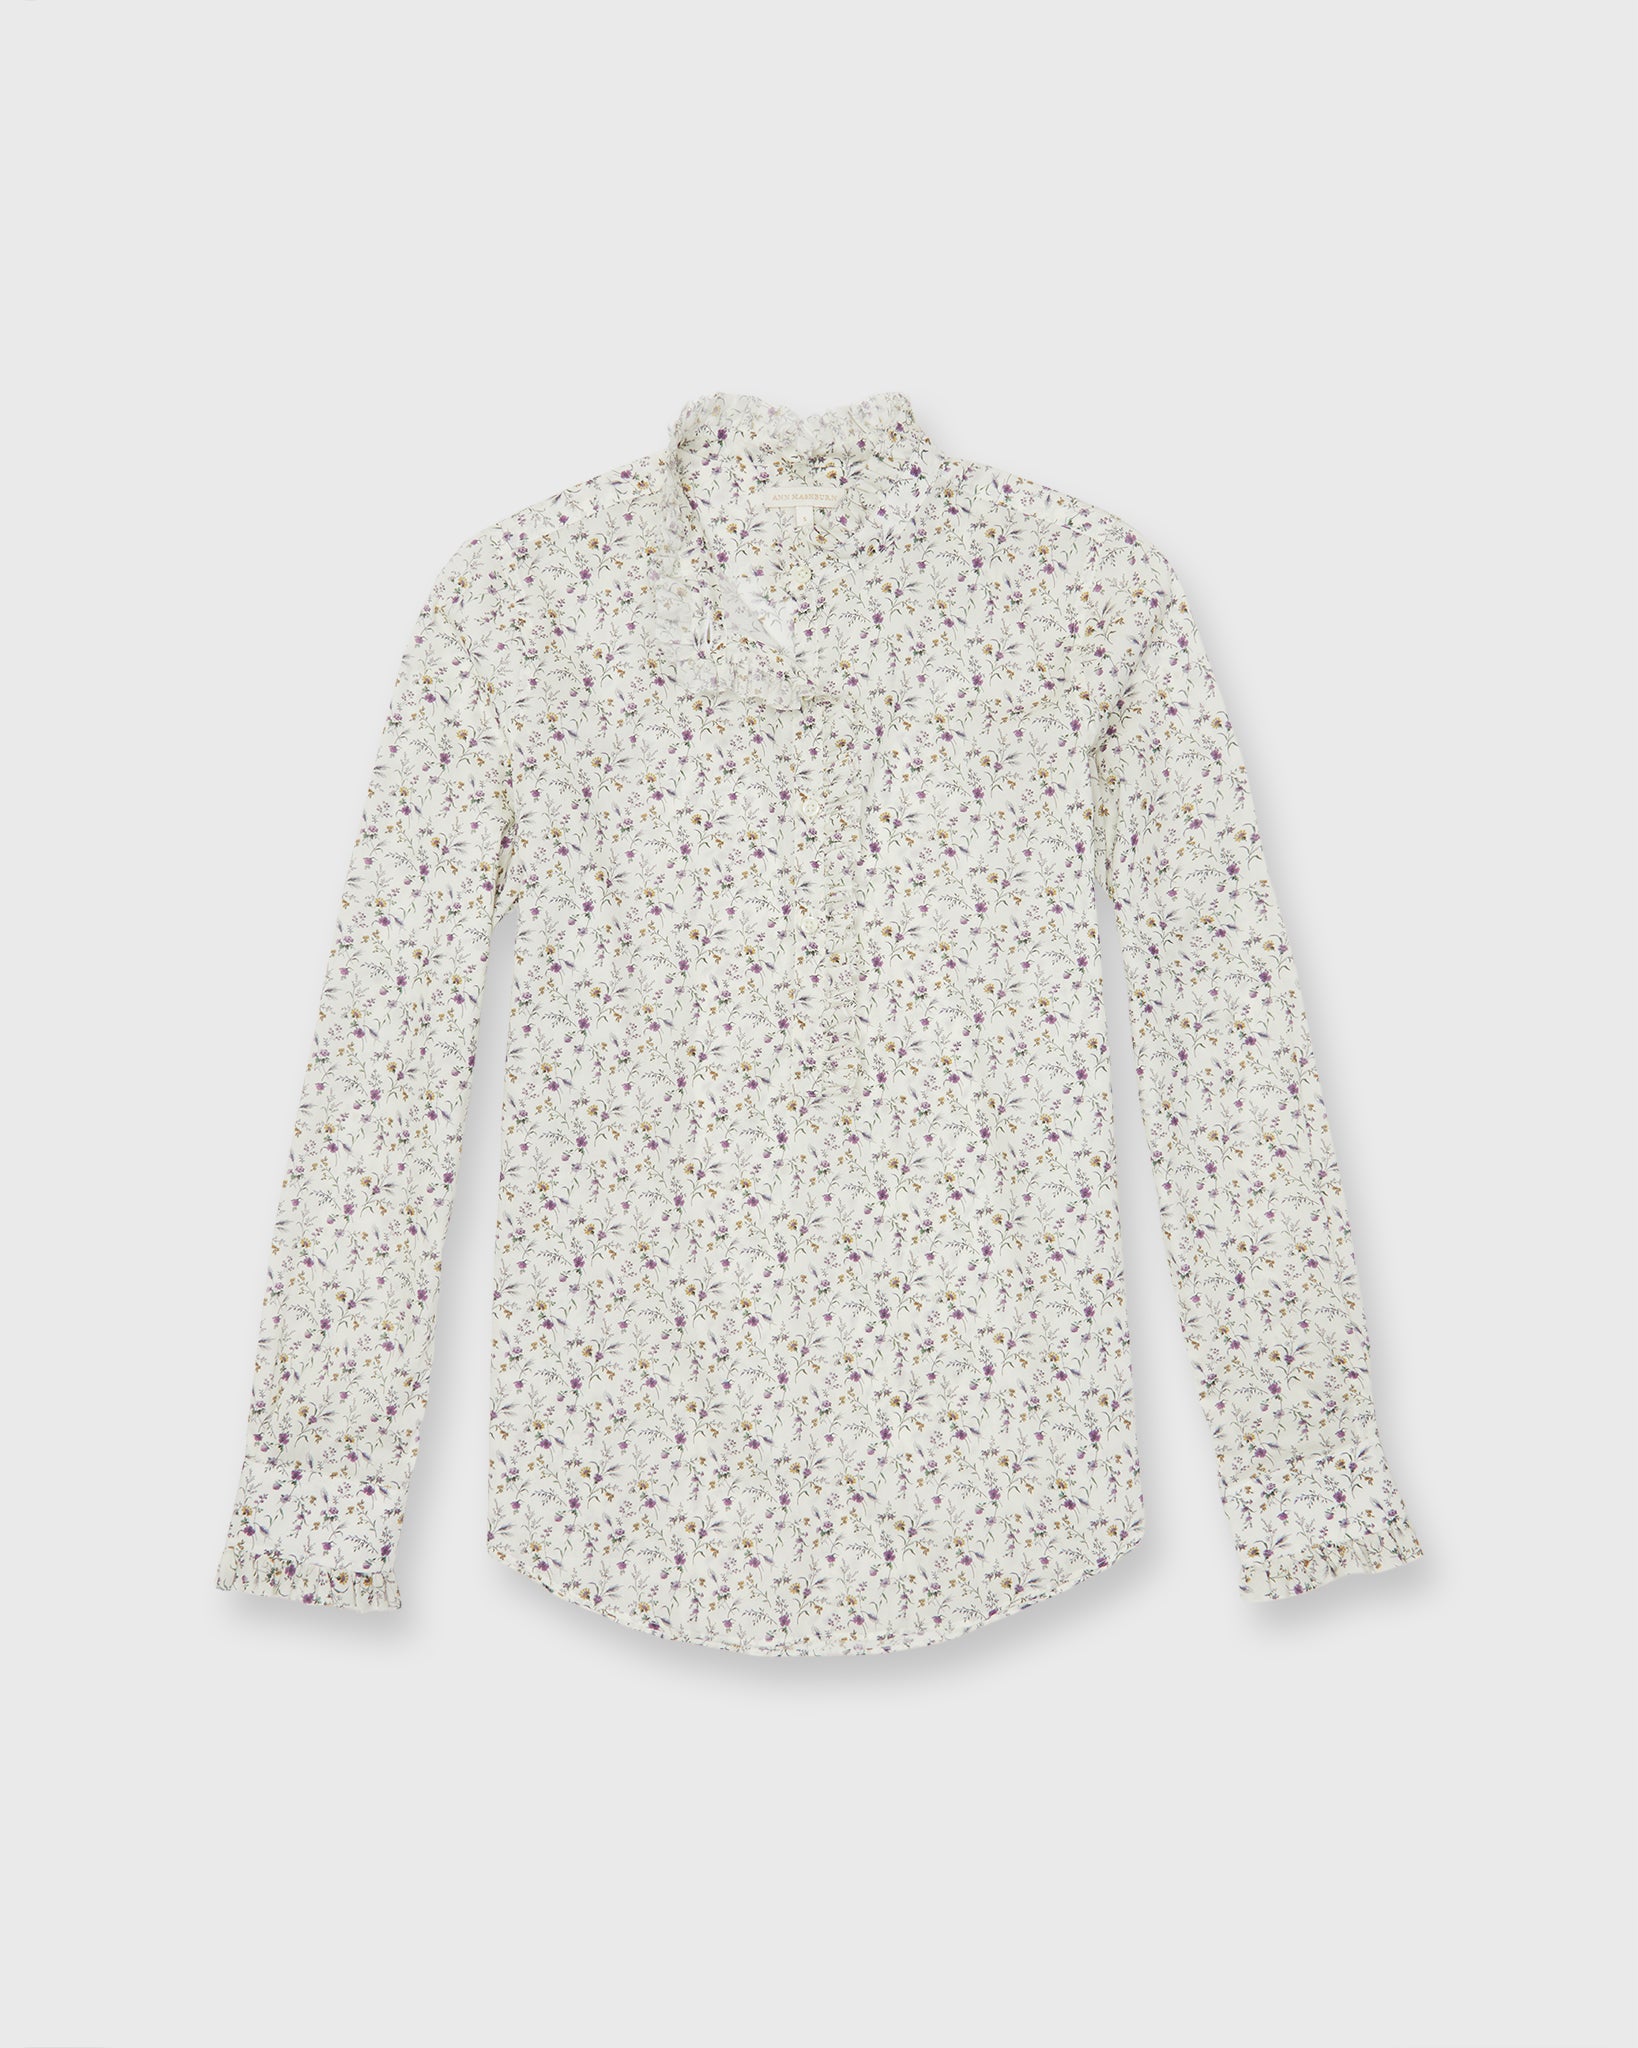 Frill Shirt in Ivory/Lavender Emma Victoria Liberty Fabric